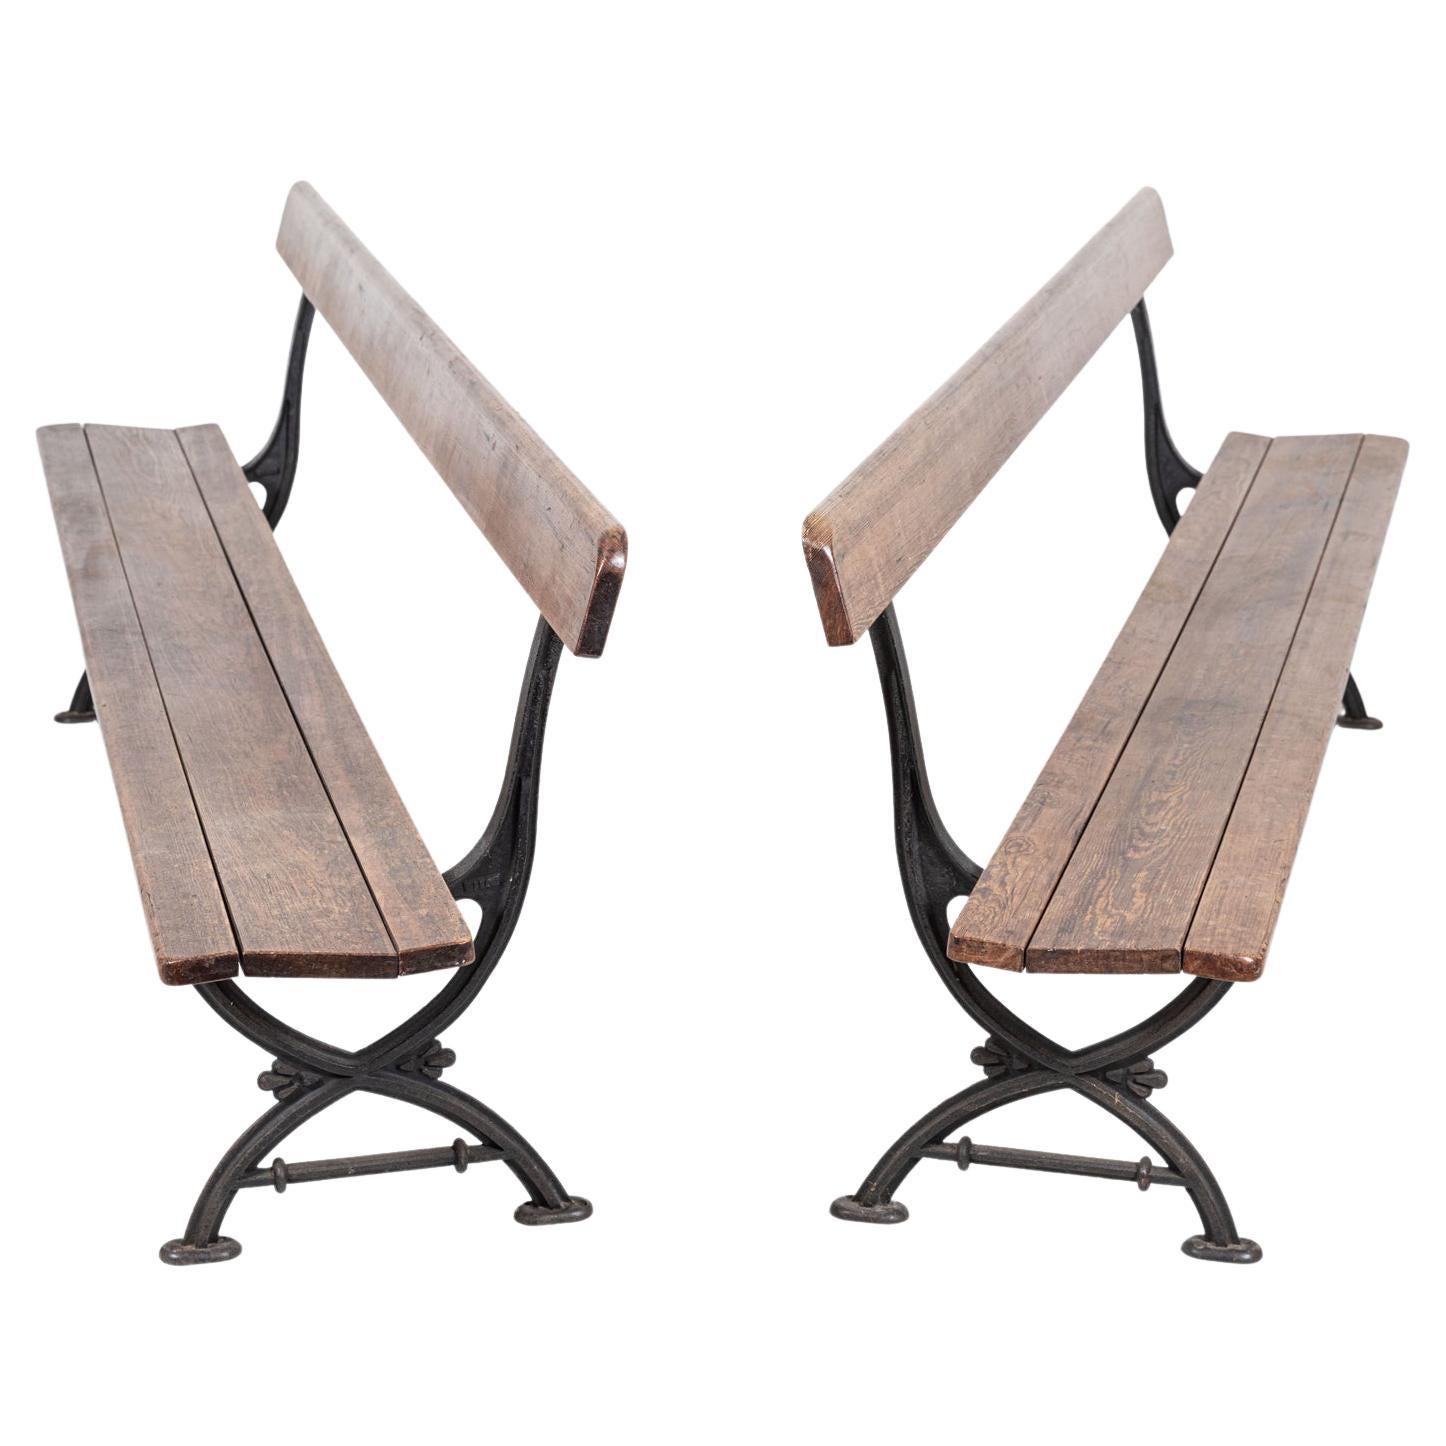 Pair 19thC English Cast Iron Pitch Pine Benches